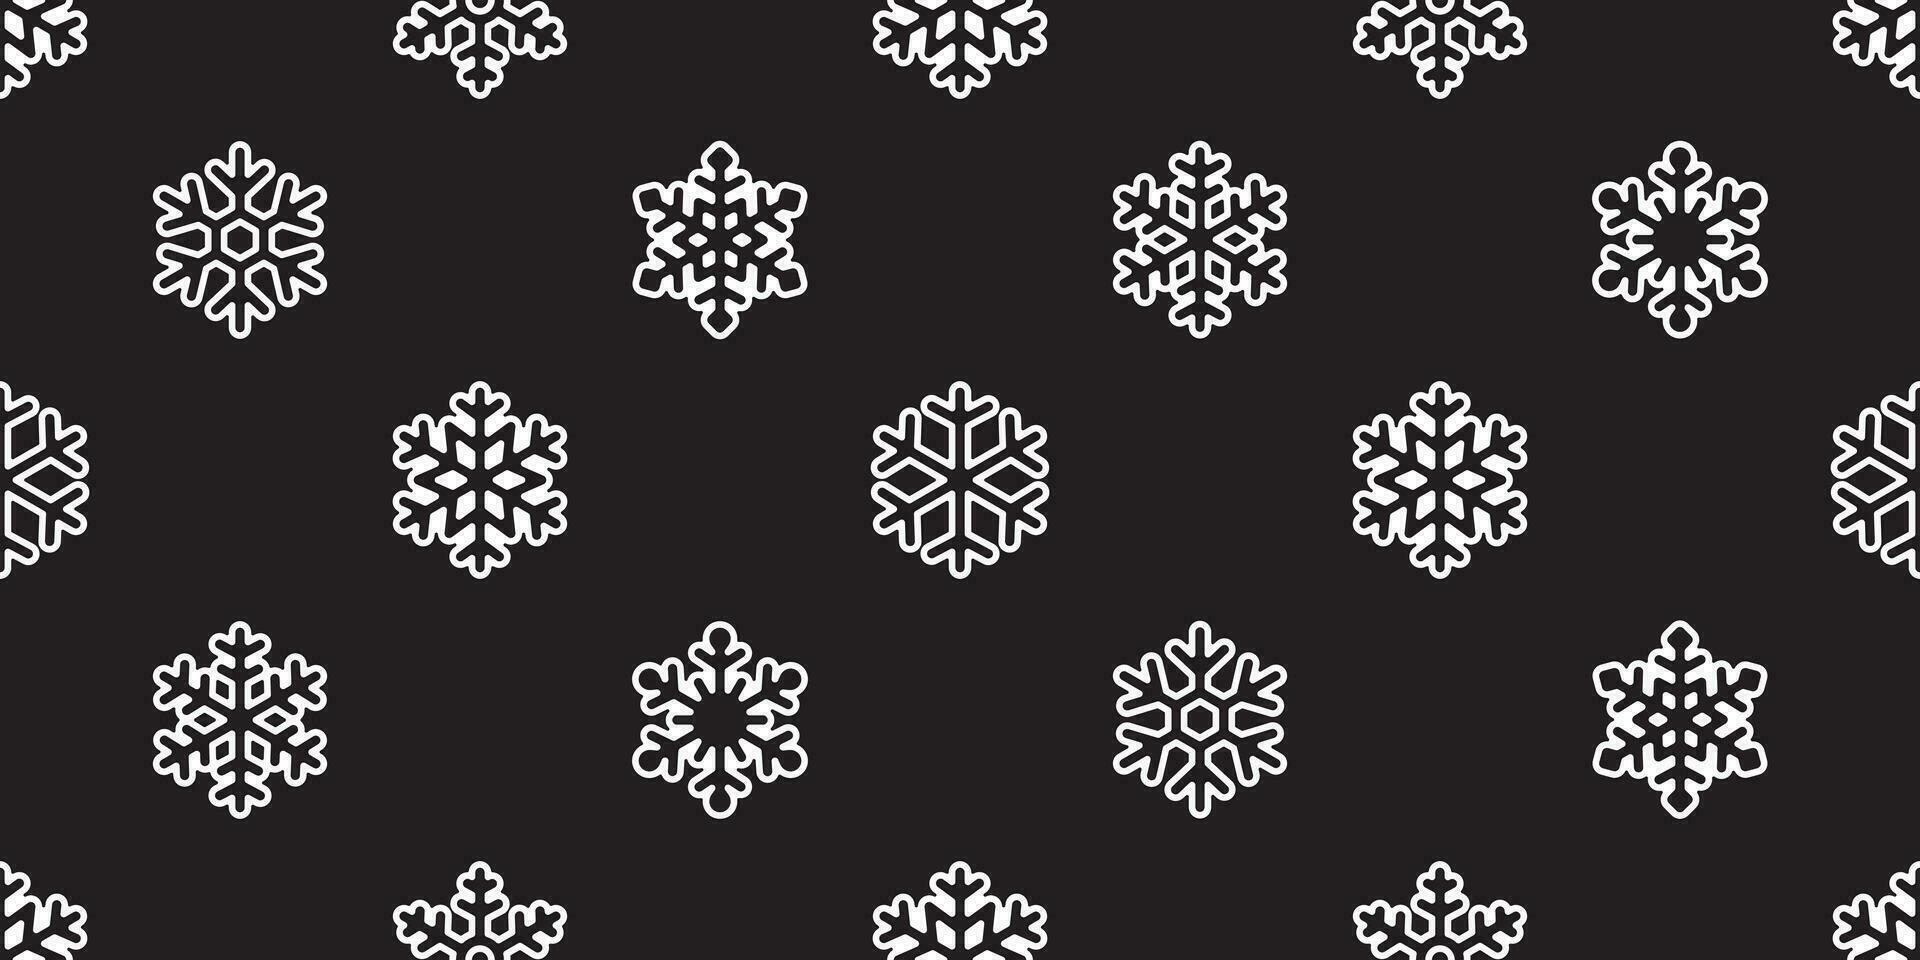 Snowflake seamless pattern Christmas vector snow Xmas Santa Claus scarf isolated tile background repeat wallpaper illustration gift wrapping paper line design